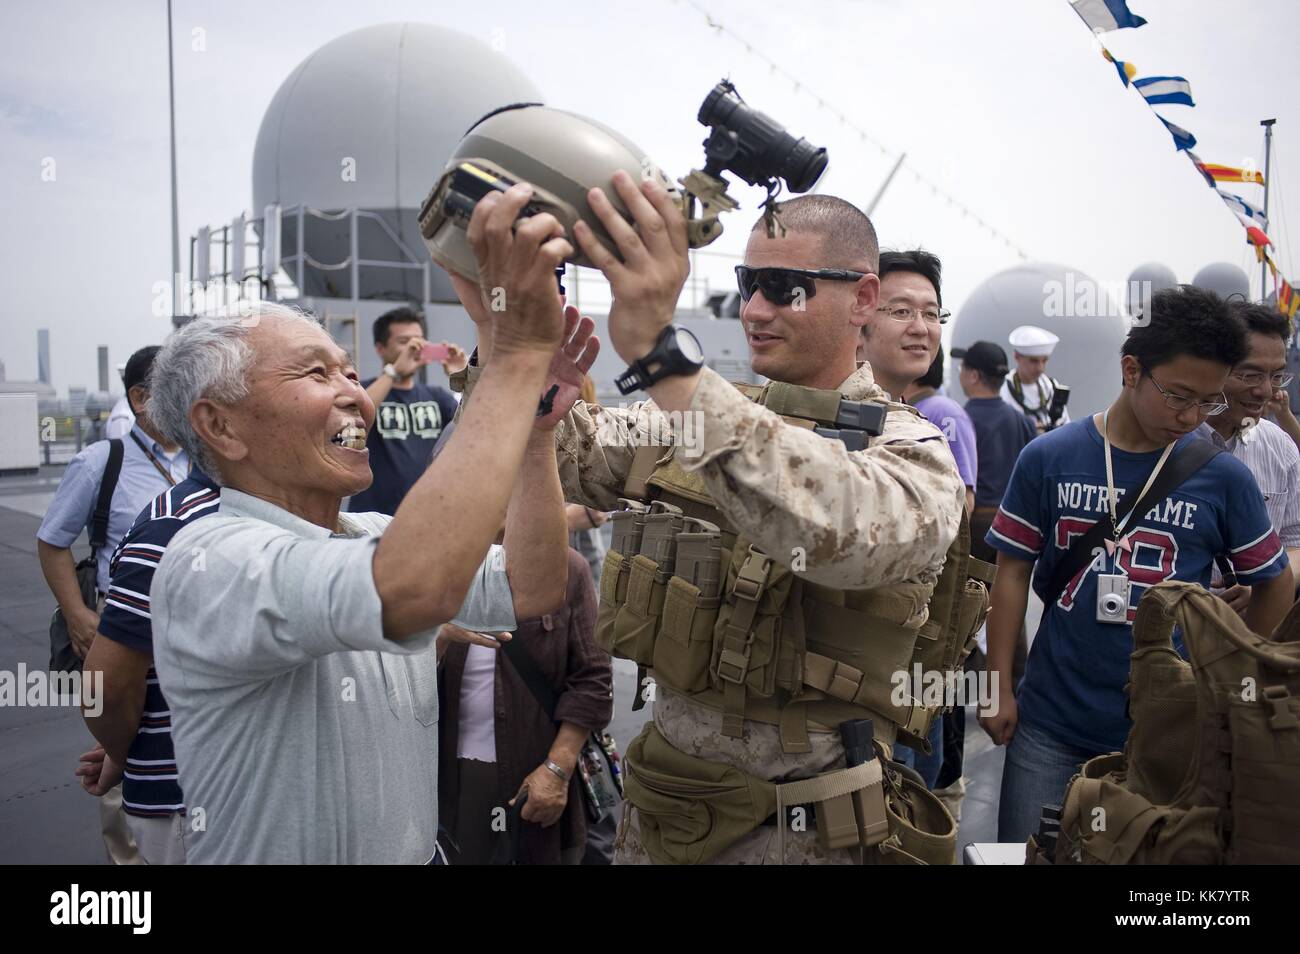 Staff Sgt Max Veliz, a Marine assigned to Fleet Anti-Terrorism Security Team FAST Company Pacific, 3rd Platoon, puts a helmet on a visitor during an open ship tour aboard the US 7th Fleet flagship USS Blue Ridge LCC 19 in Tokyo, Japan, 2012. Image courtesy Mass Communication Specialist 3rd Class Fidel C. Hart/US Navy. Stock Photo